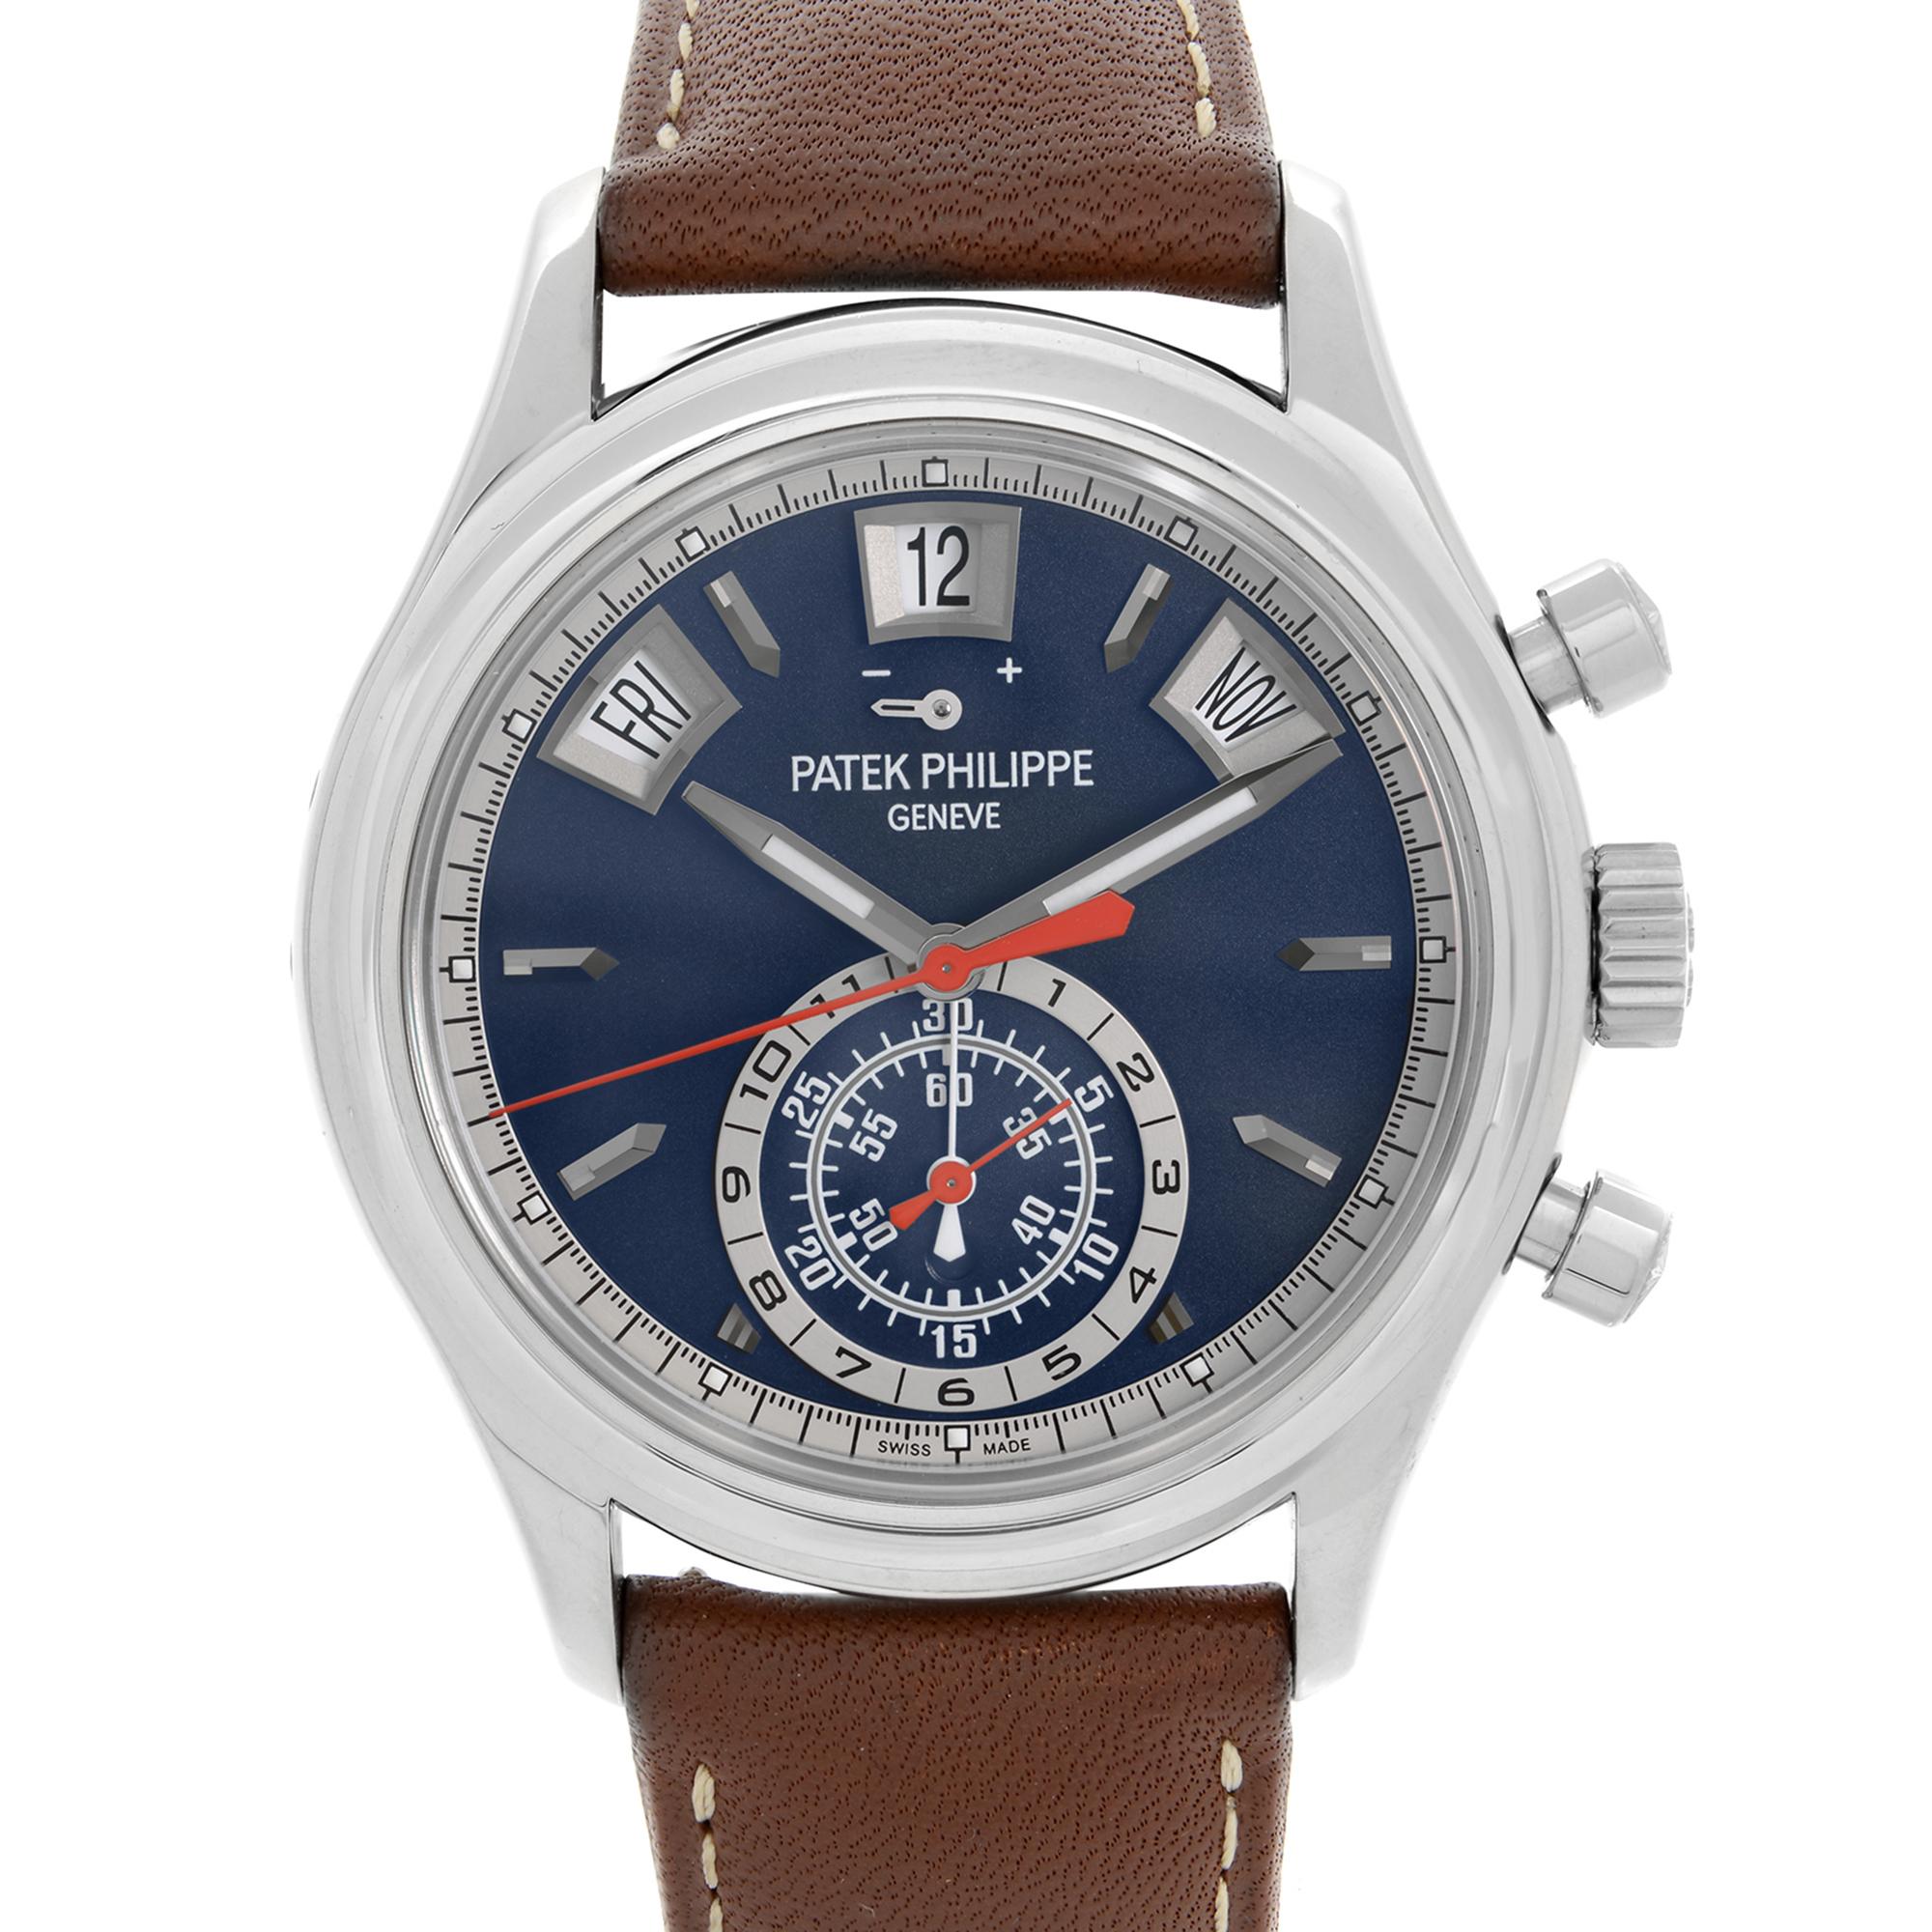 Pre-owned Patek Philippe Complications Annual Calendar White Gold Men's Watch 5960/01G-001. The watch comes with two sets of straps and closures: mint preowned, 21-16mm, 100-65mm brown grainy pattern leather strap on the 18K white gold buckle and a